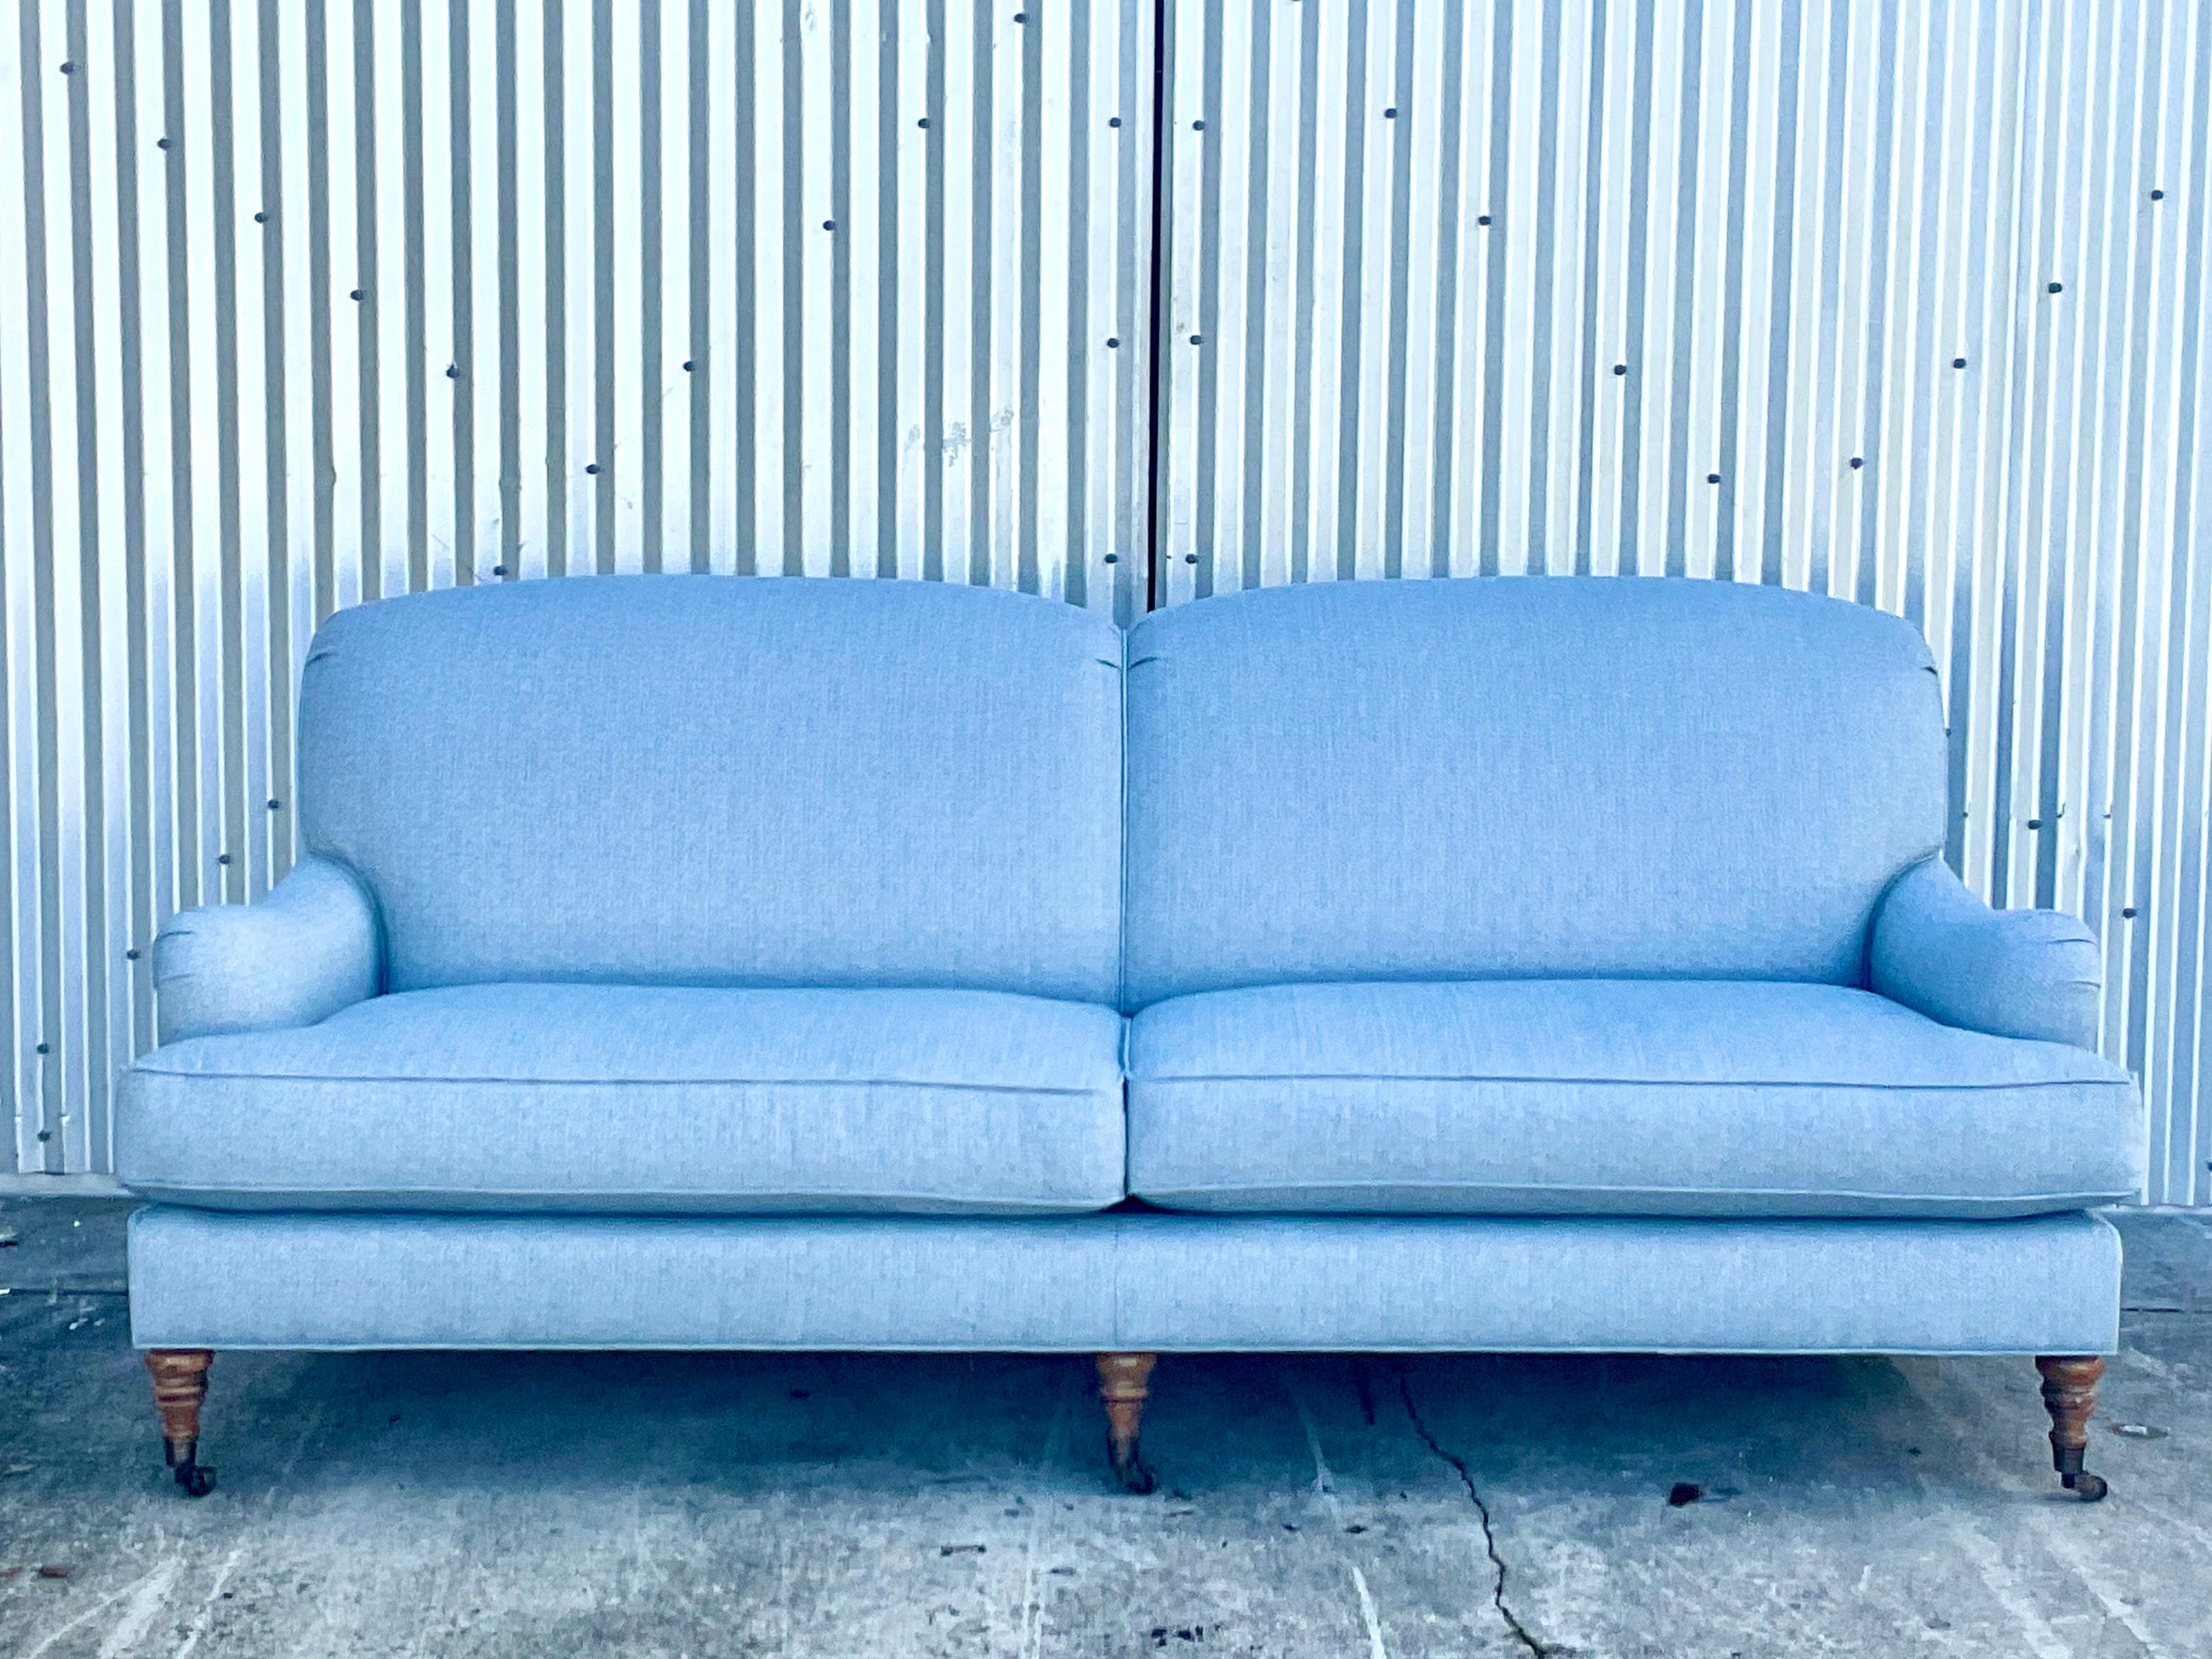 Incredible custom roll arm sofa. Impeccably built and covered in a blue herringbone Schumacher performance fabric. Less than one year old and in pristine condition. Acquired from an El Cid estate.